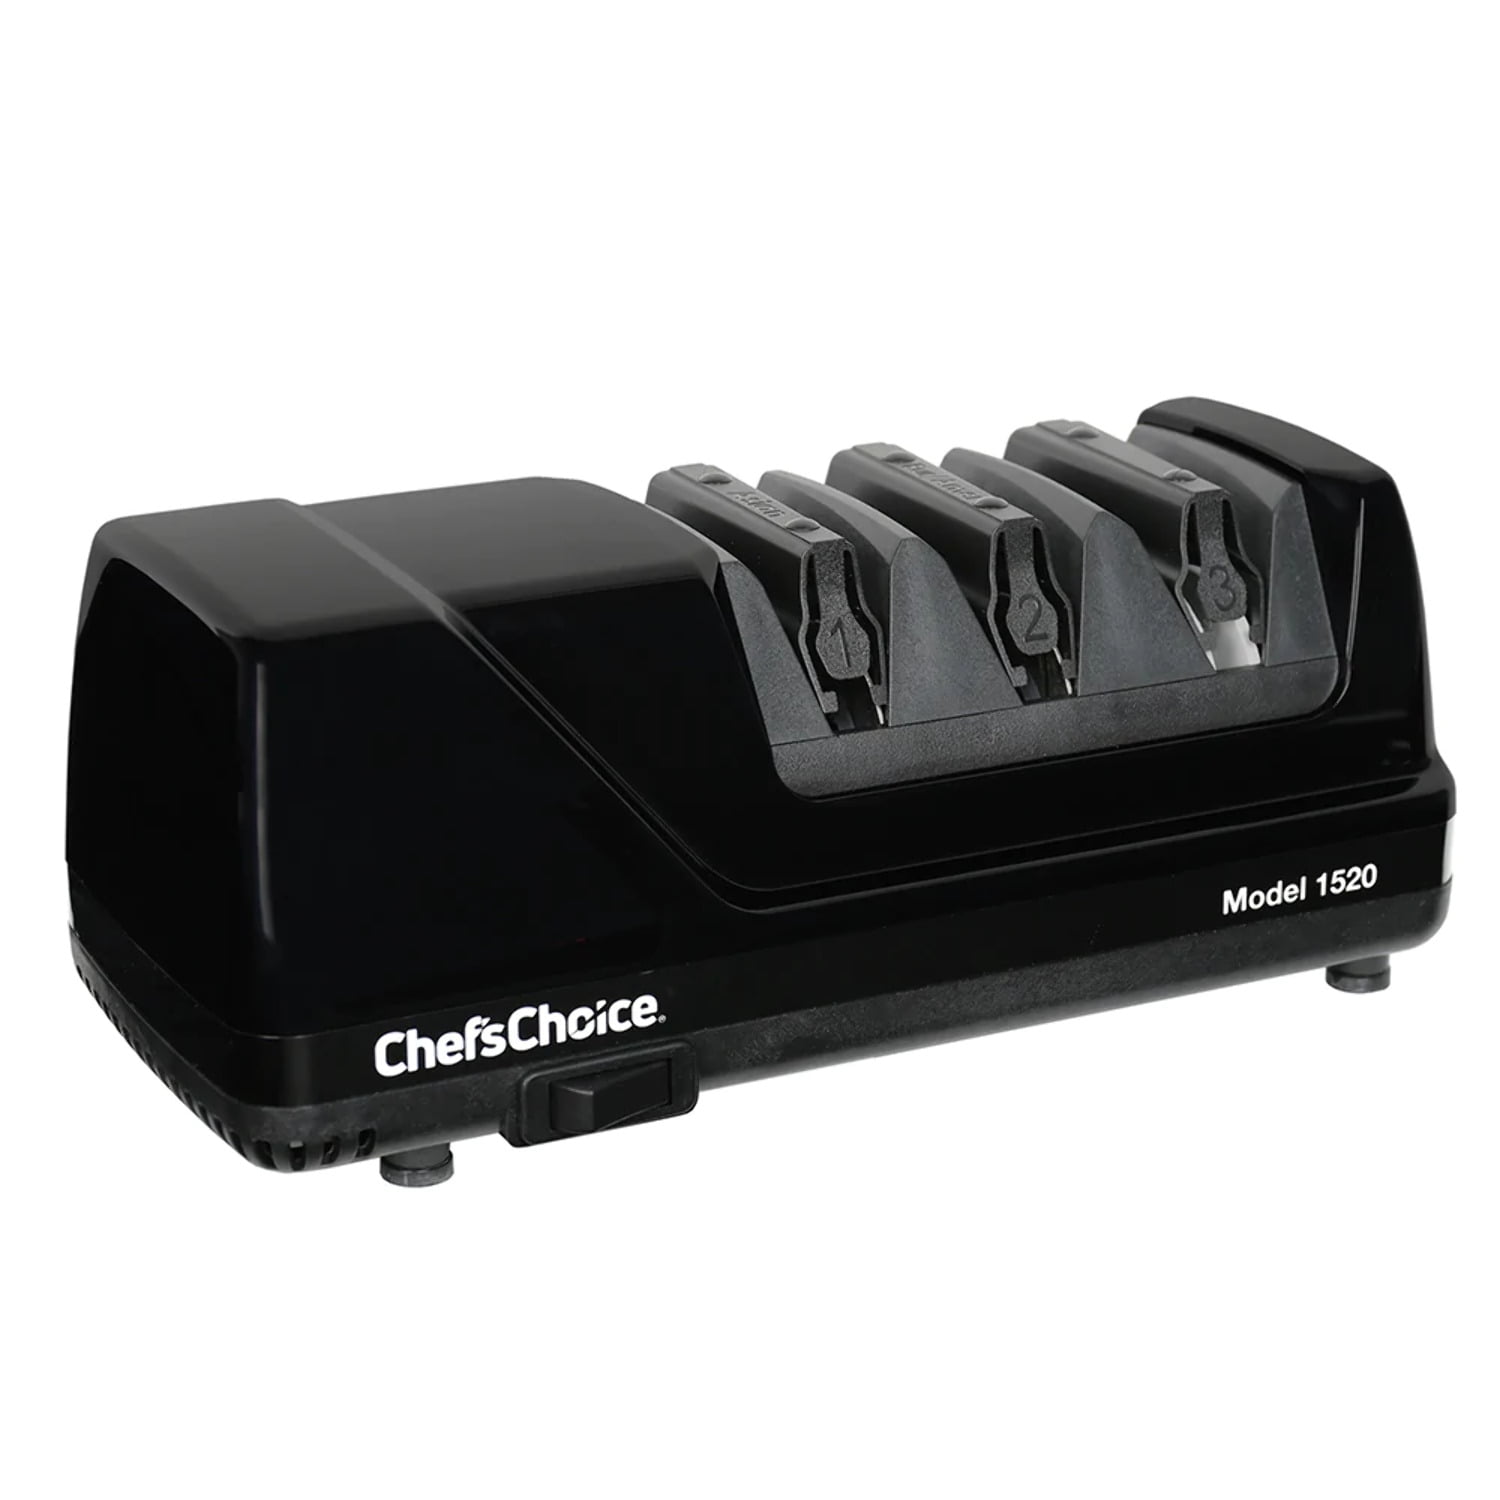 Chef'sChoice Model 130 EdgeSelect Professional Electric Knife Sharpener, in  Black